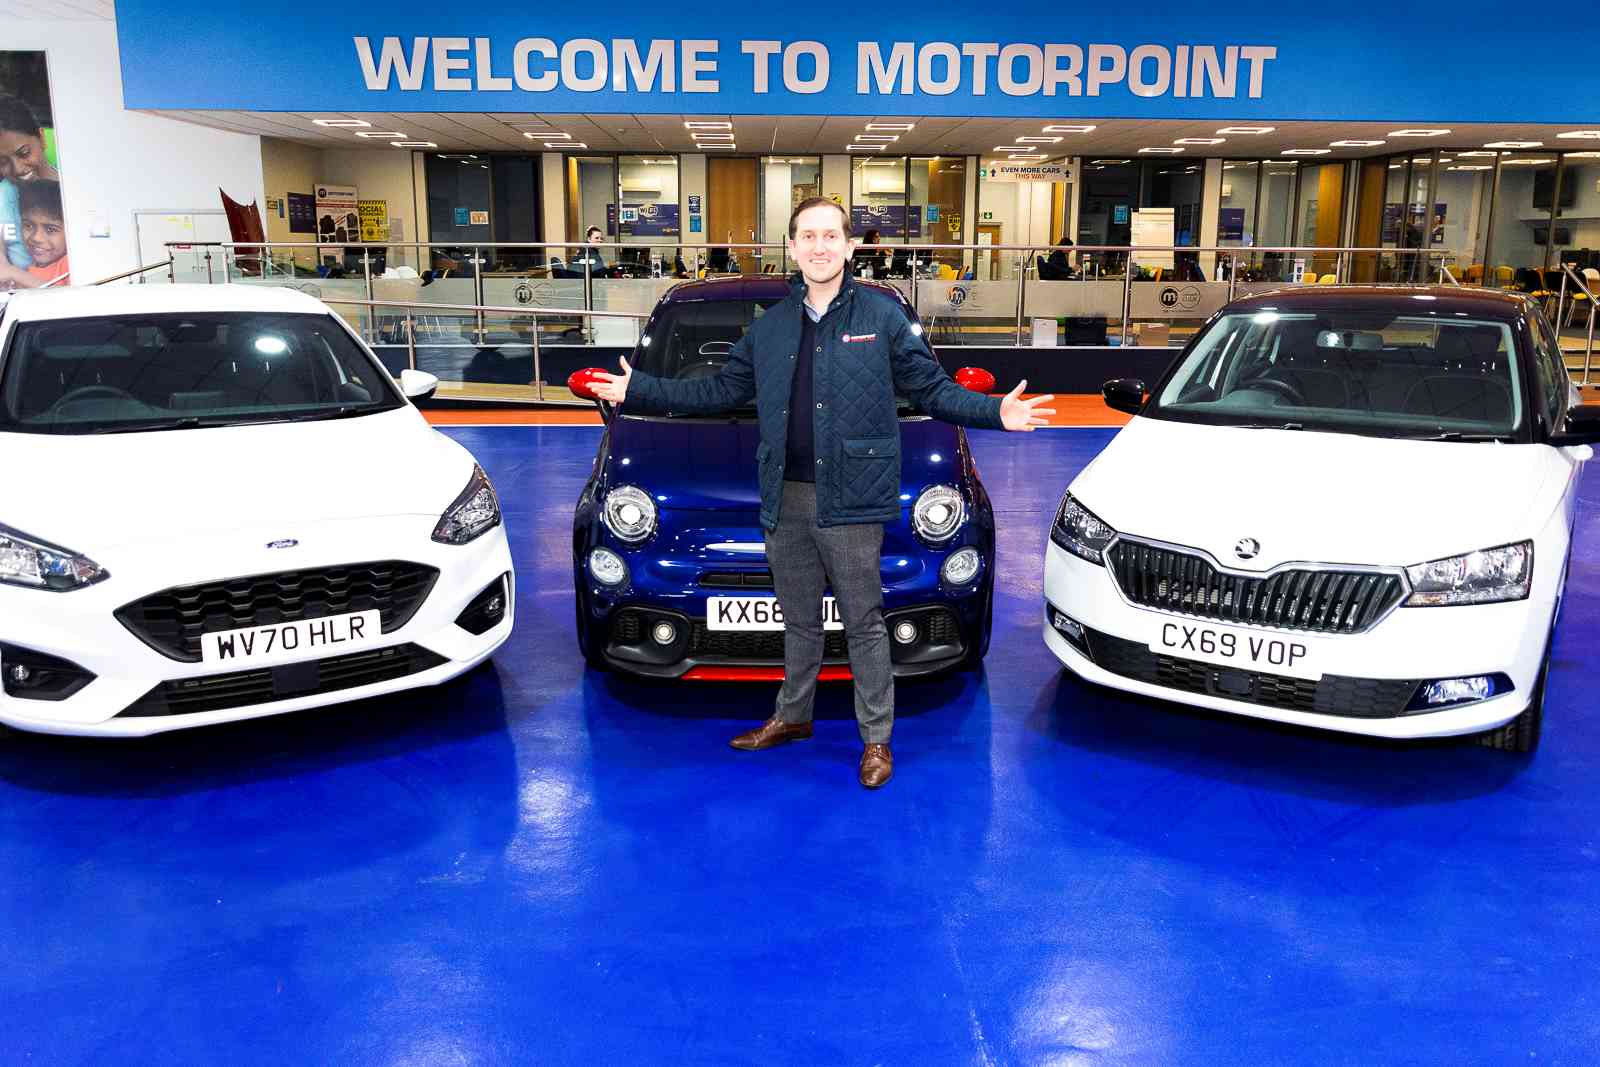 Mark Jones, Sales Manager at Motorpoint in Birmingham celebrates the news that the company has been chosen to deliver the Clean Air Zone Scrappage Scheme in the city from June 2021 onwards 